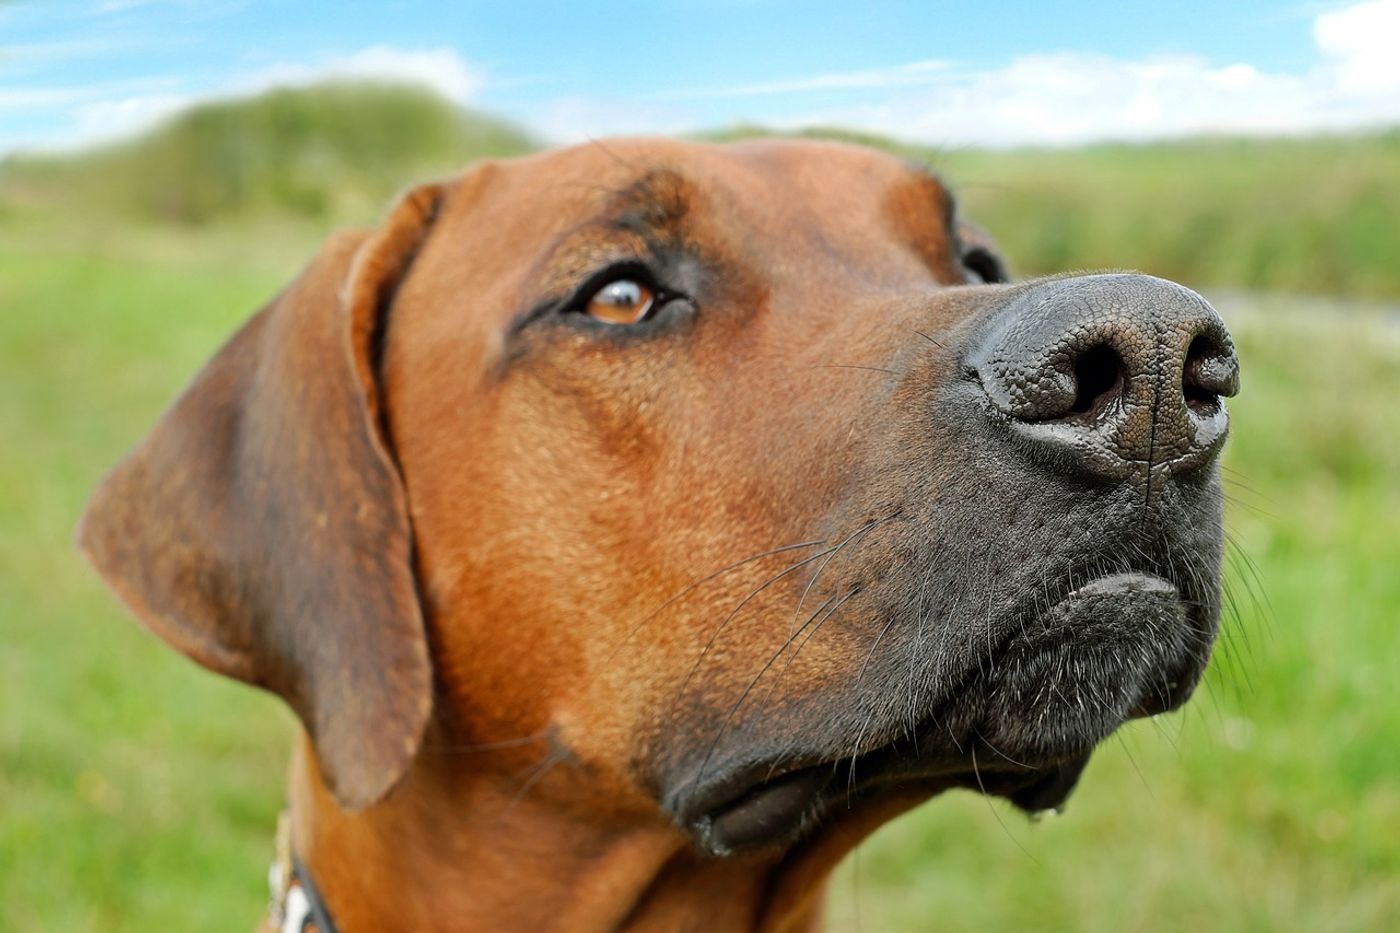 A dog's nose can track scents for long distances, so why aren't we using dogs to help with animal conservation and tracking?